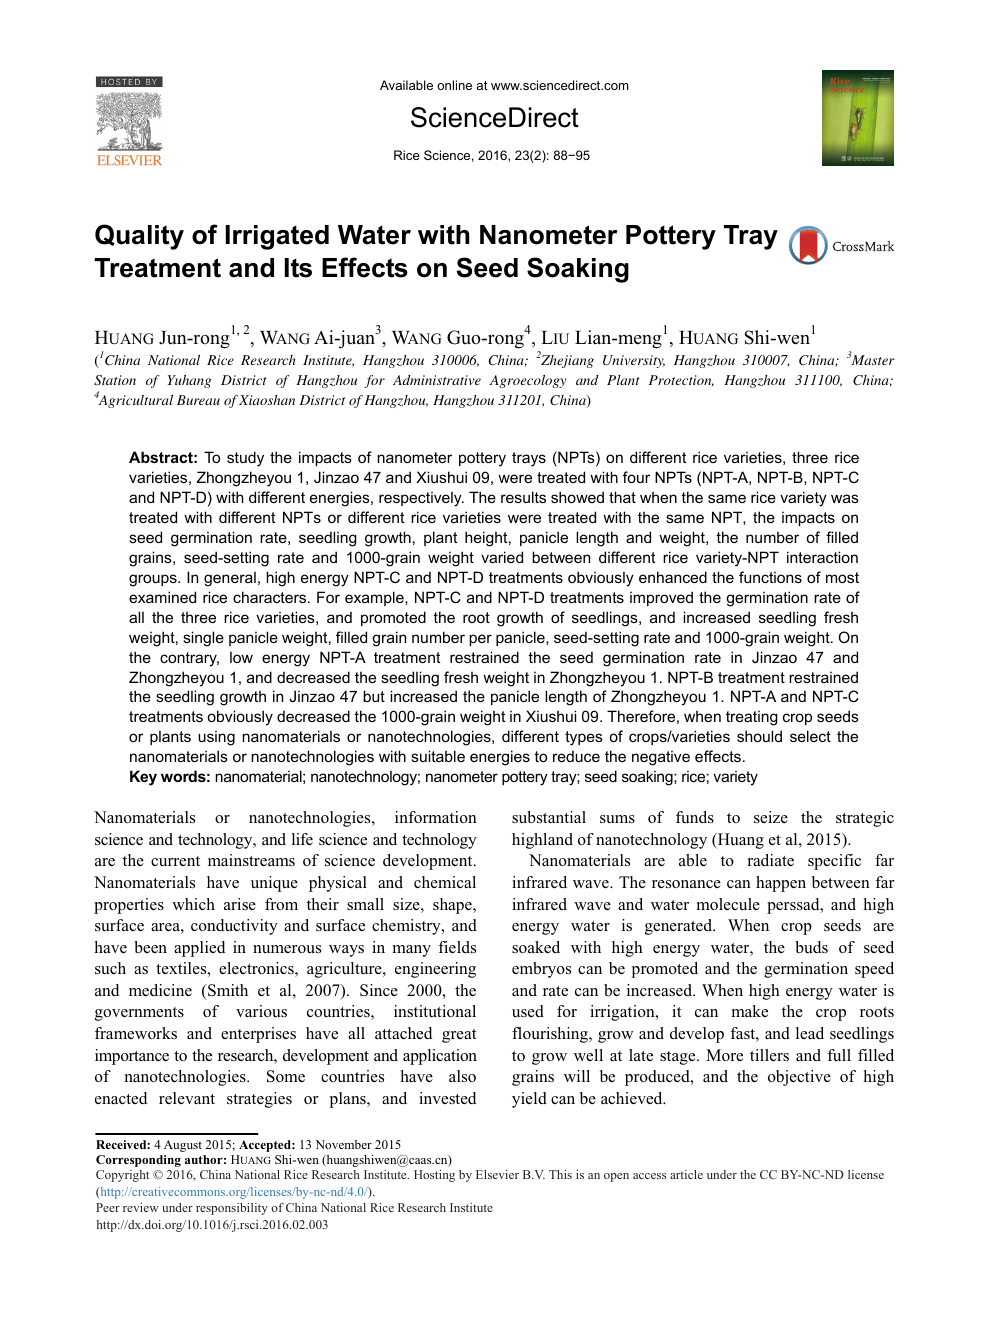 Quality Of Irrigated Water With Nanometer Pottery Tray Treatment And Its Effects On Seed Soaking Topic Of Research Paper In Agricultural Biotechnology Download Scholarly Article Pdf And Read For Free On